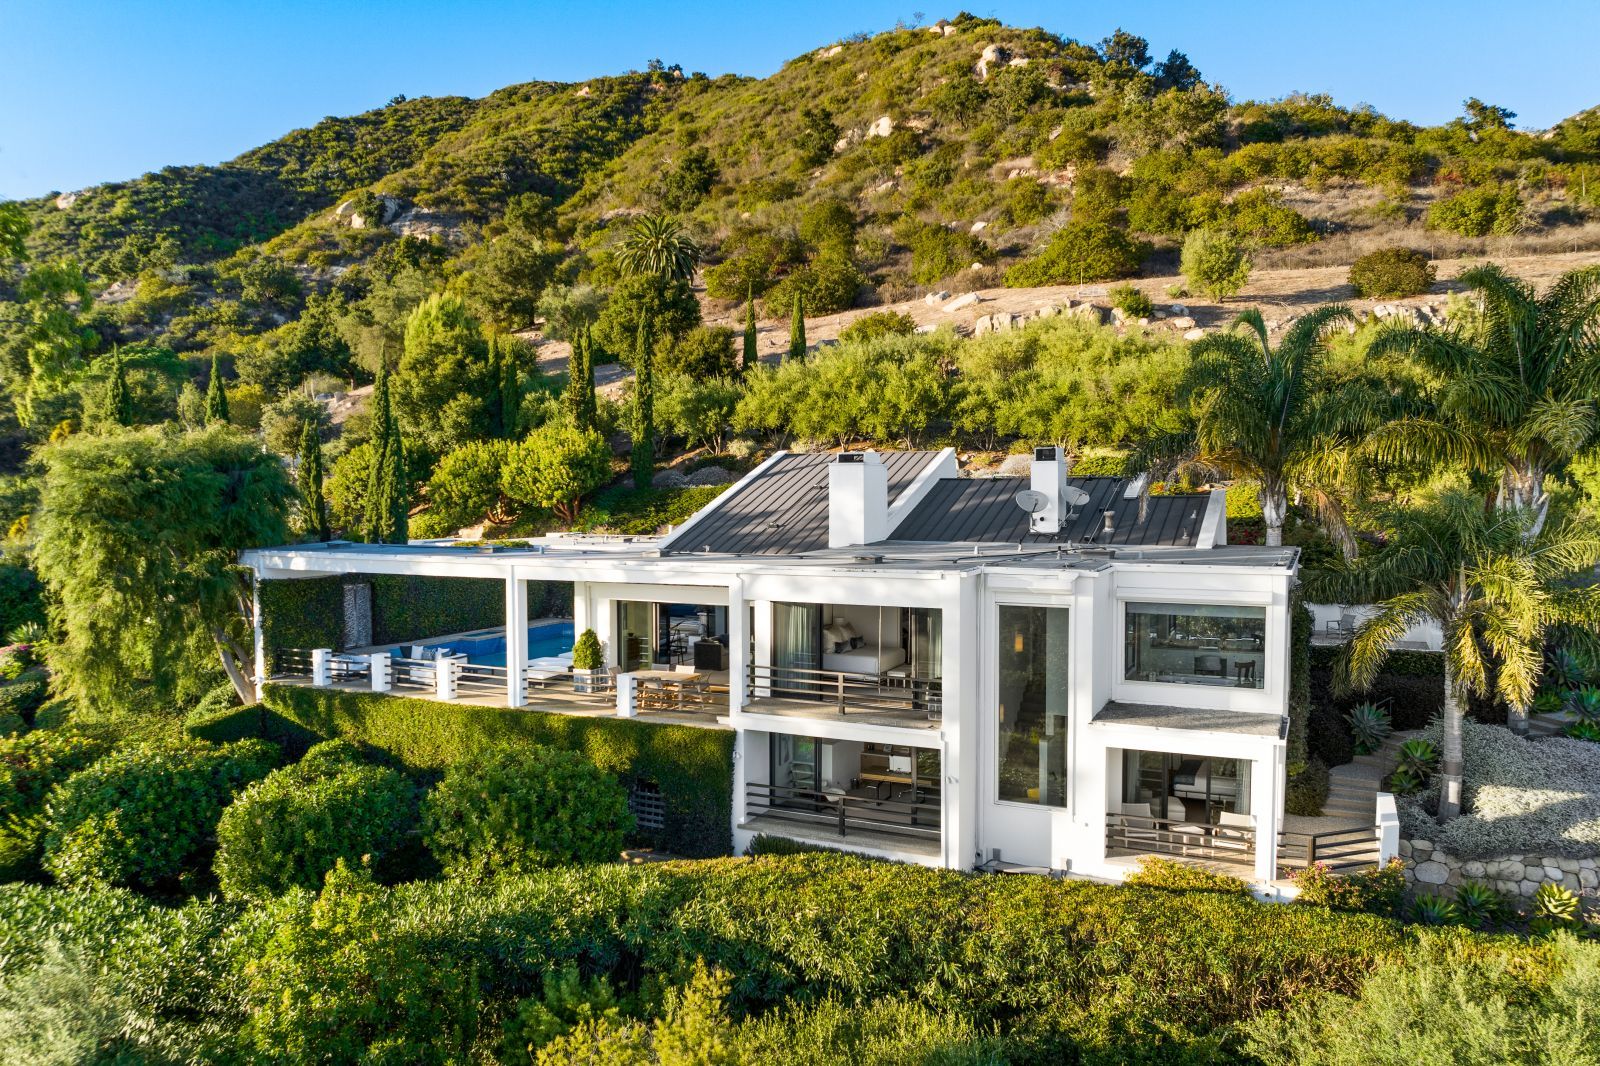 A 2-story modernist home resting on a hillside of lush grass and trees.